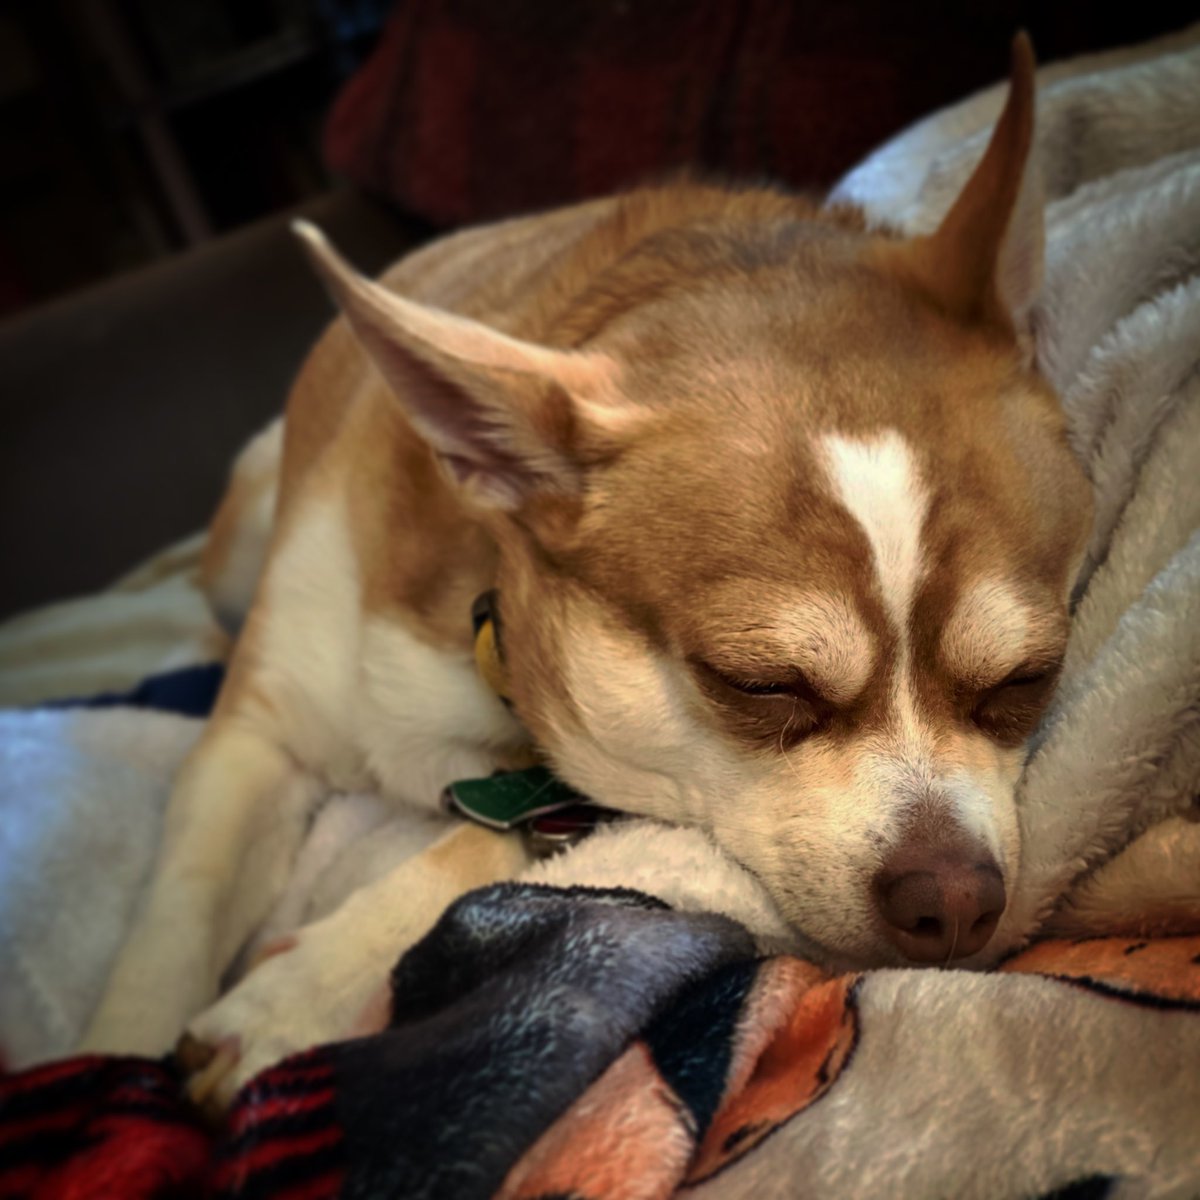 Protecting us from the evil sheep, collecting them so no one is forced into soul sucking naps….

#dogs #dogsoftwitter #honey #officedog #chihuahua #goodgirl #puppy #paws #blondebombshell #pets #kcmo #kansascity #missouri #recoverybunker